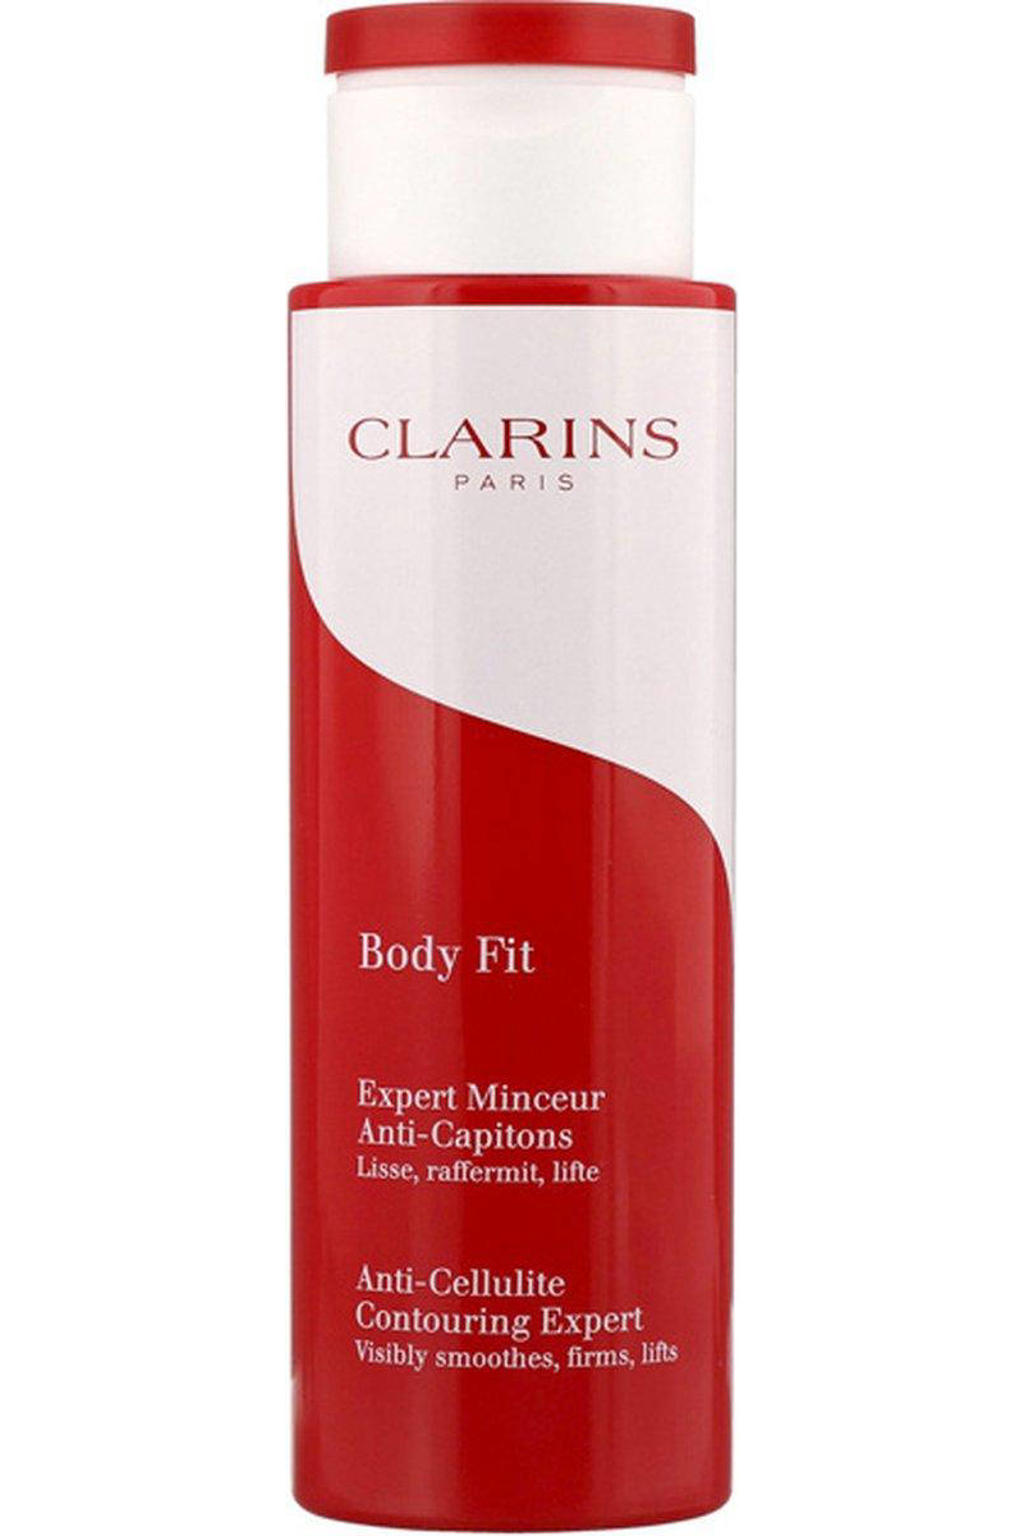 Clarins Body Fit Anti-Cellulite Contouring Expert - 200 ml